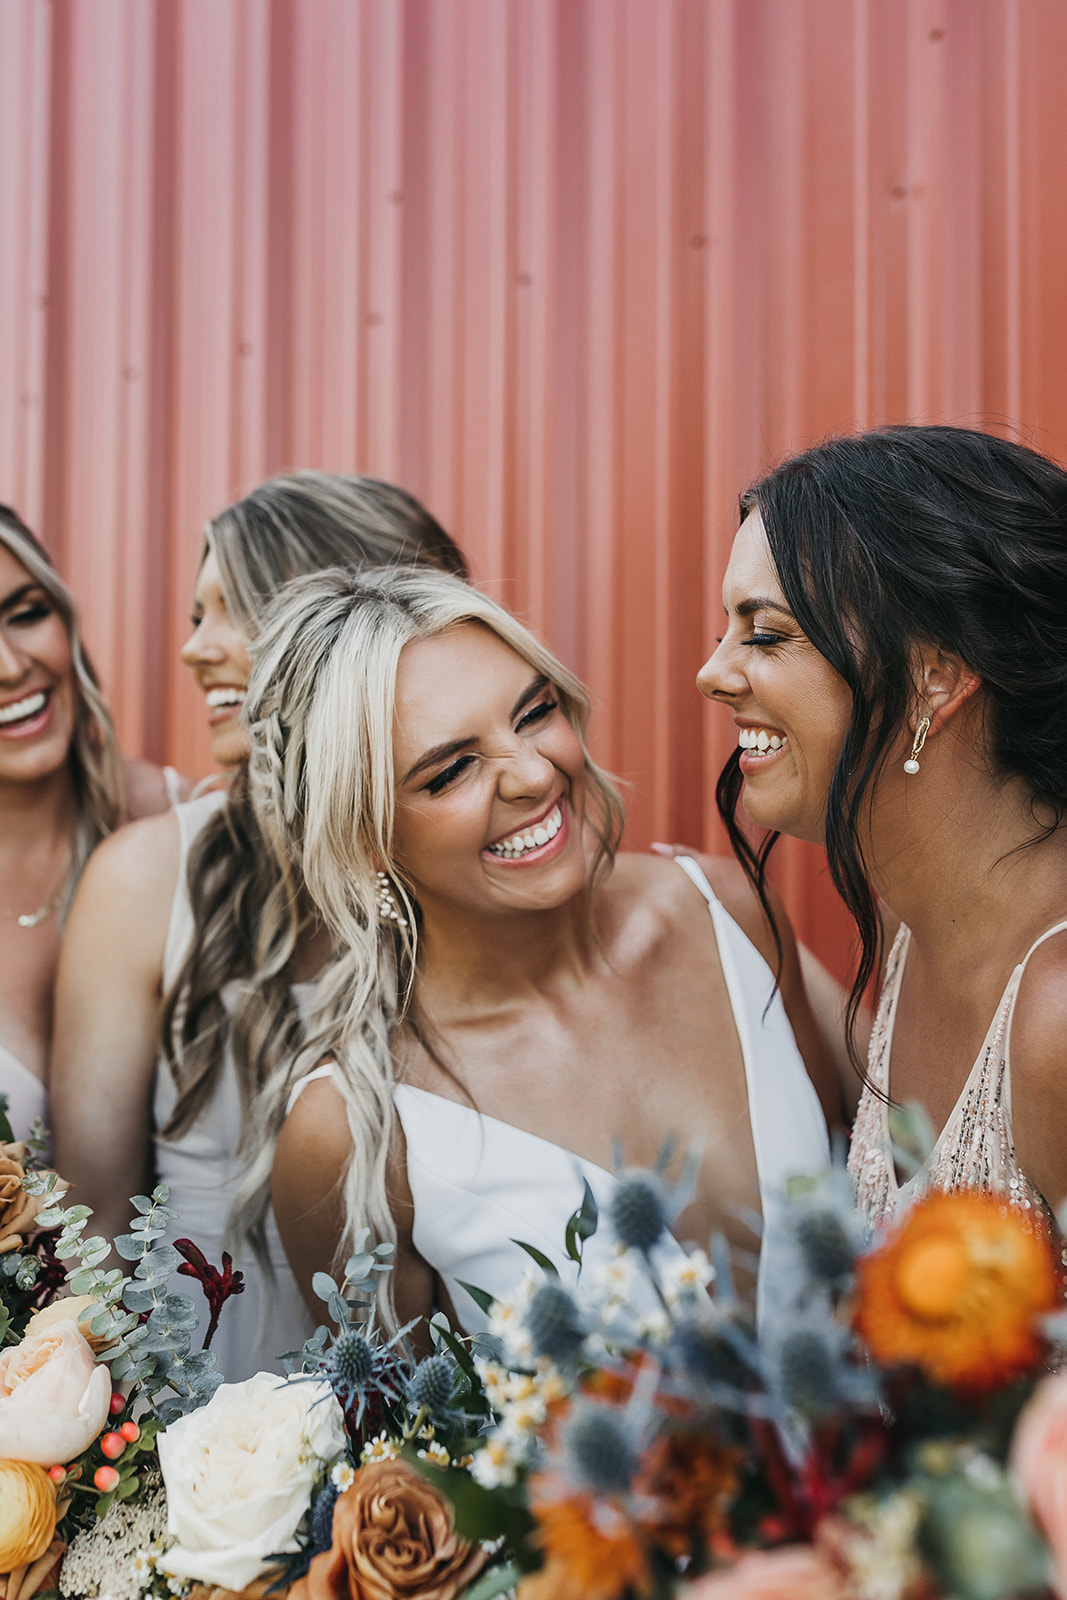 Bride and bridesmaid share a laugh before the wedding at Copper Wine Company winery